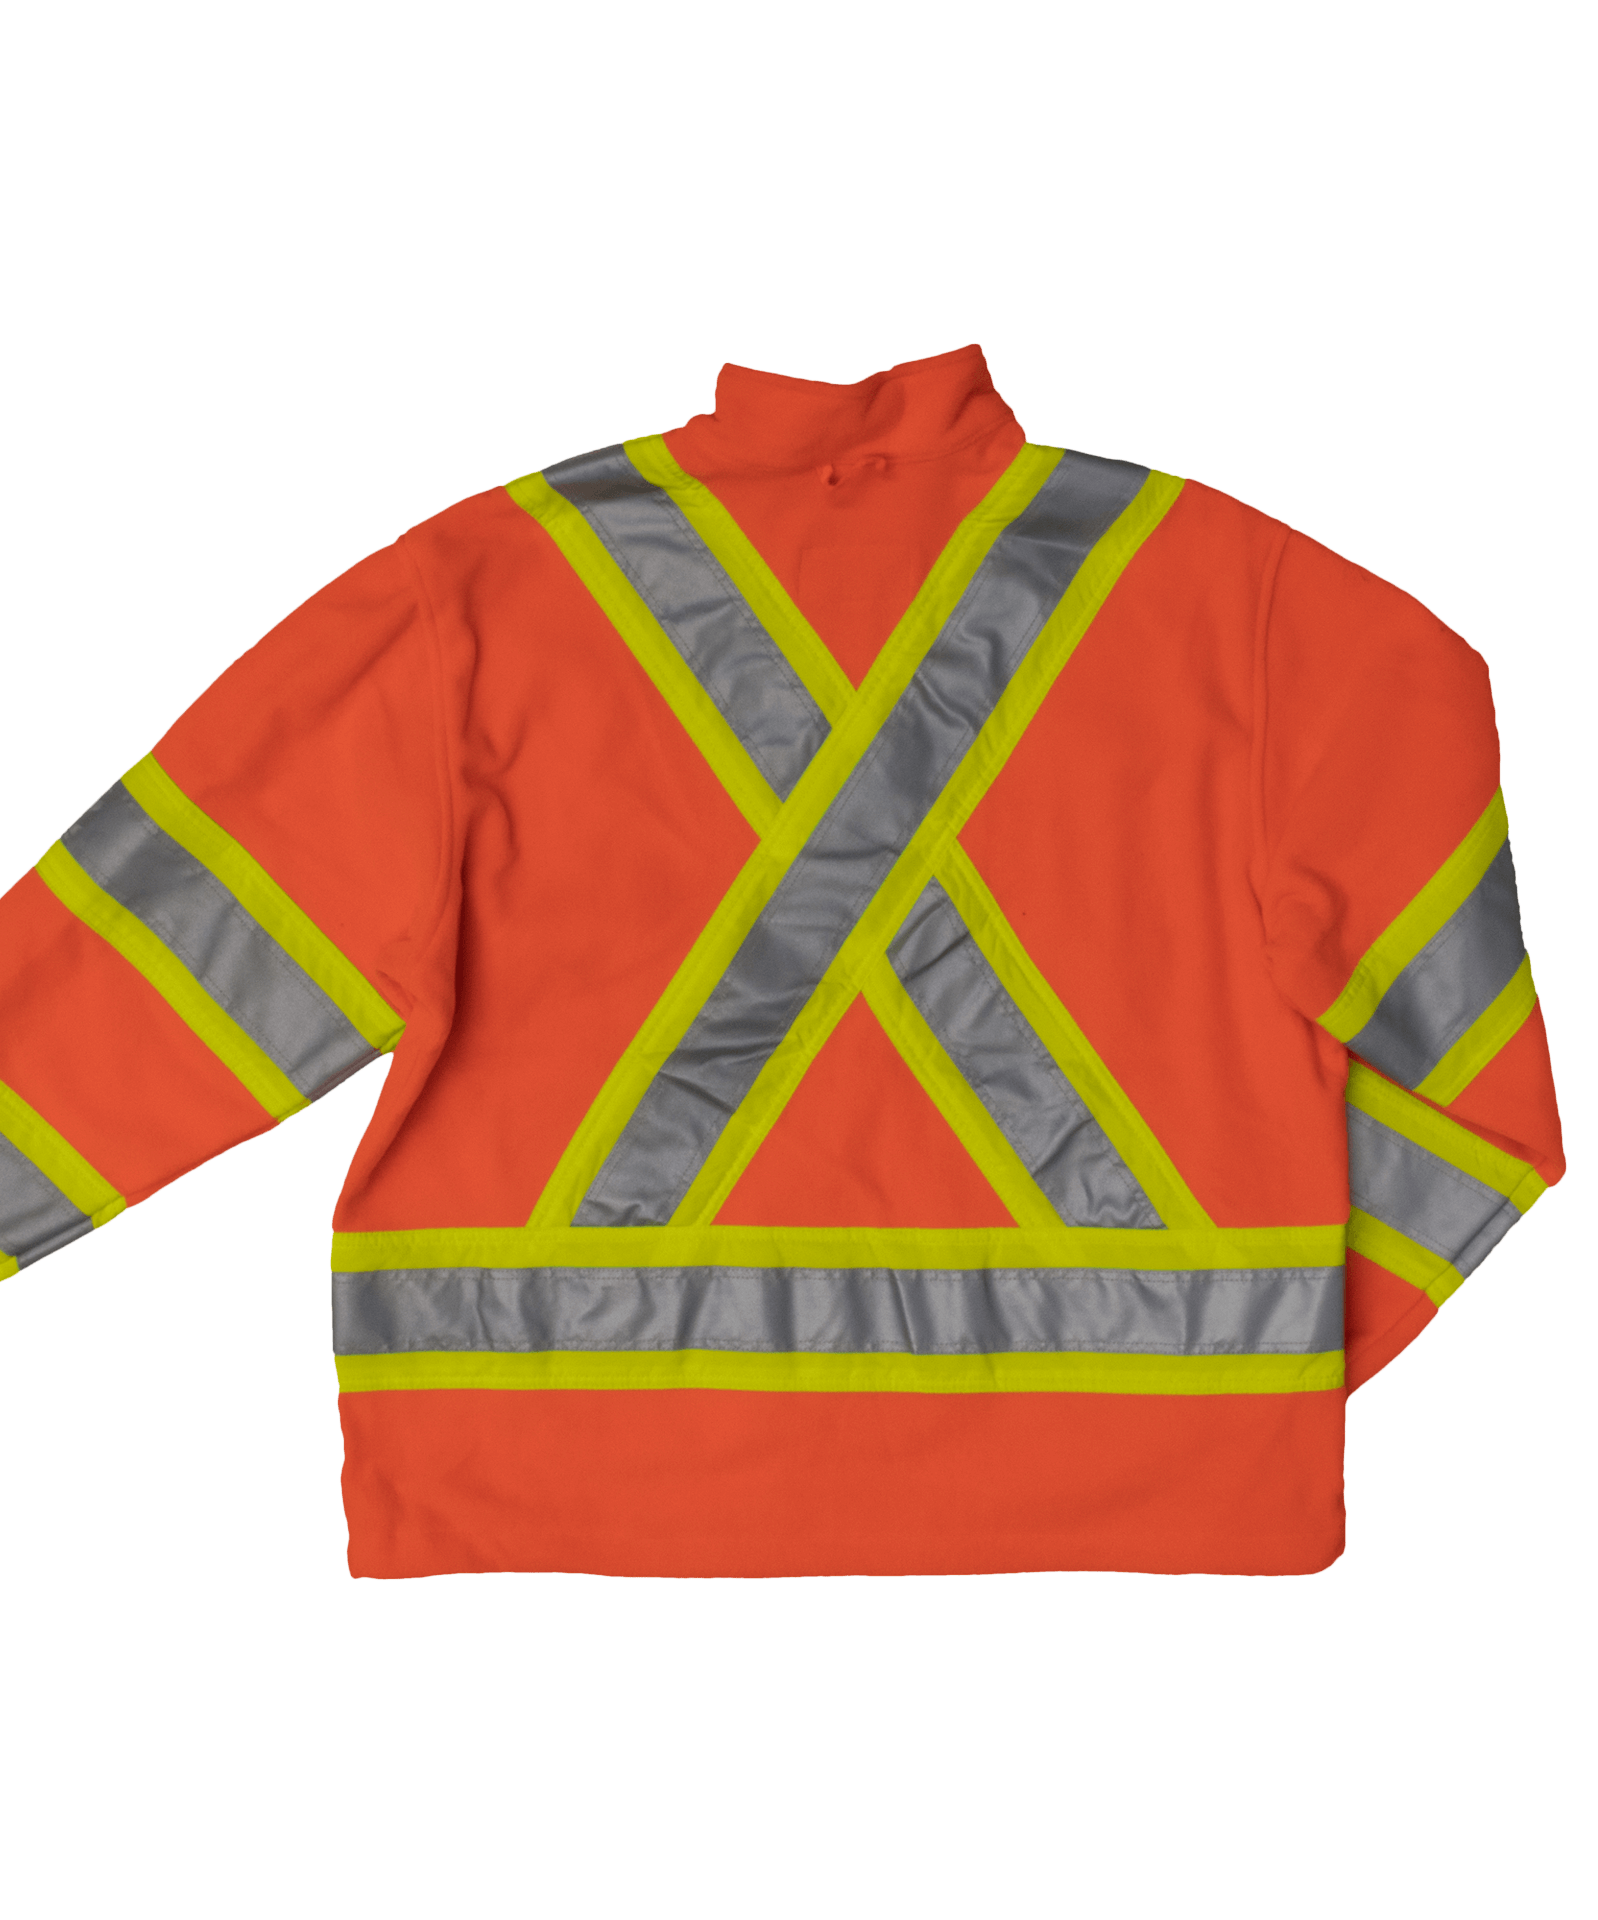 Tough Duck 3in1 Safety Bomber - Weaver and Devore Trading Ltd